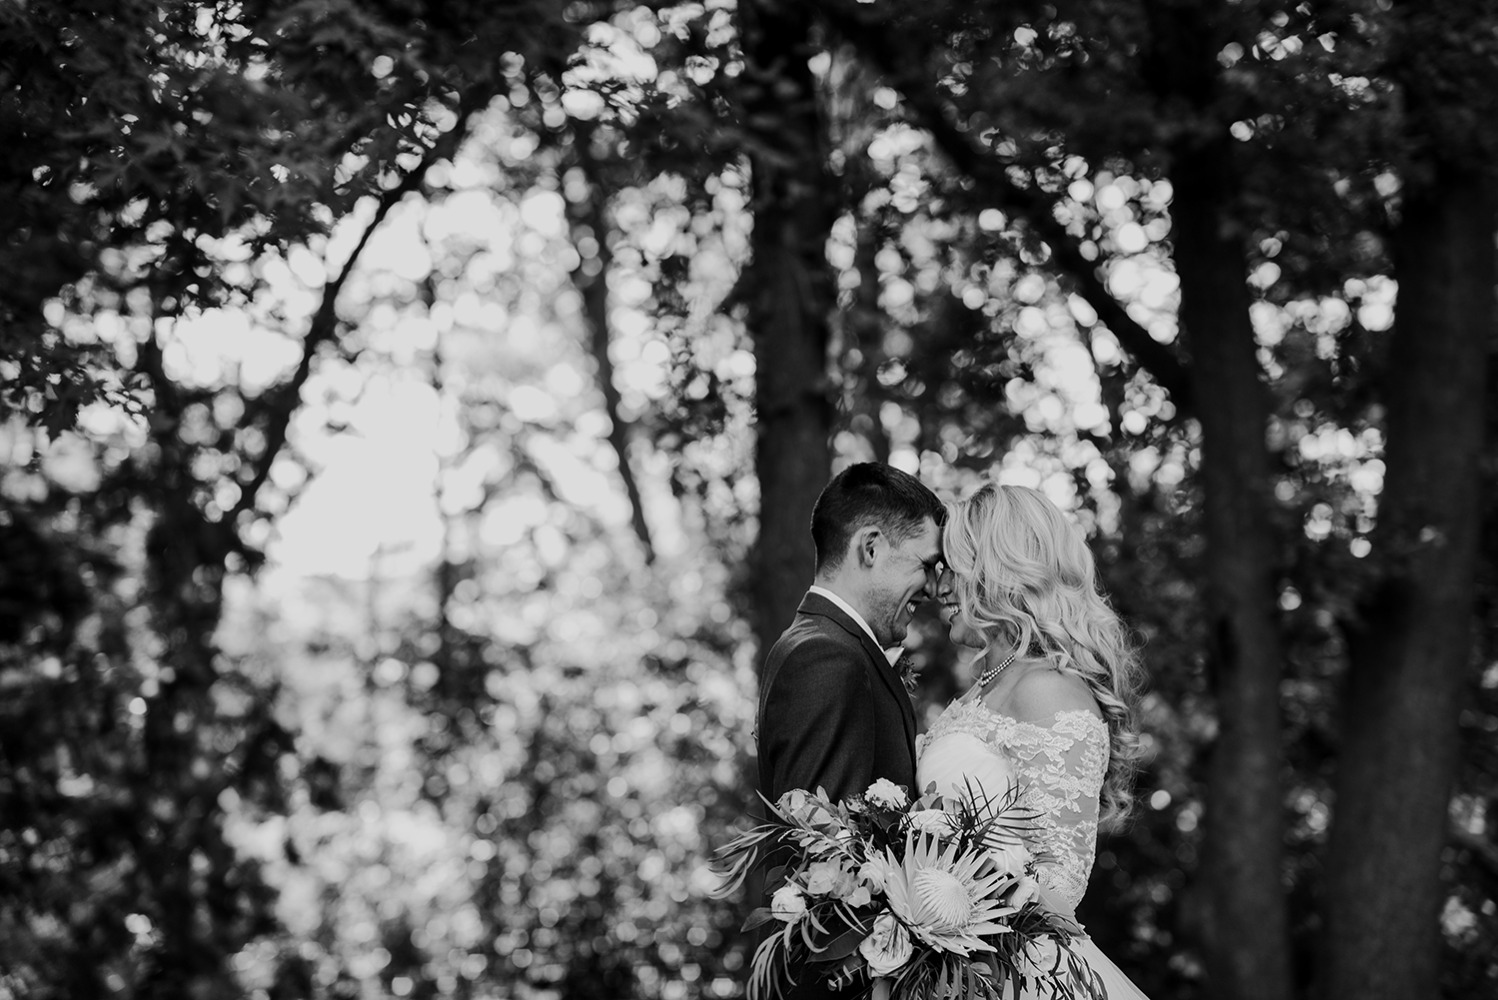 wedding-submission-from-shannon-bellisle